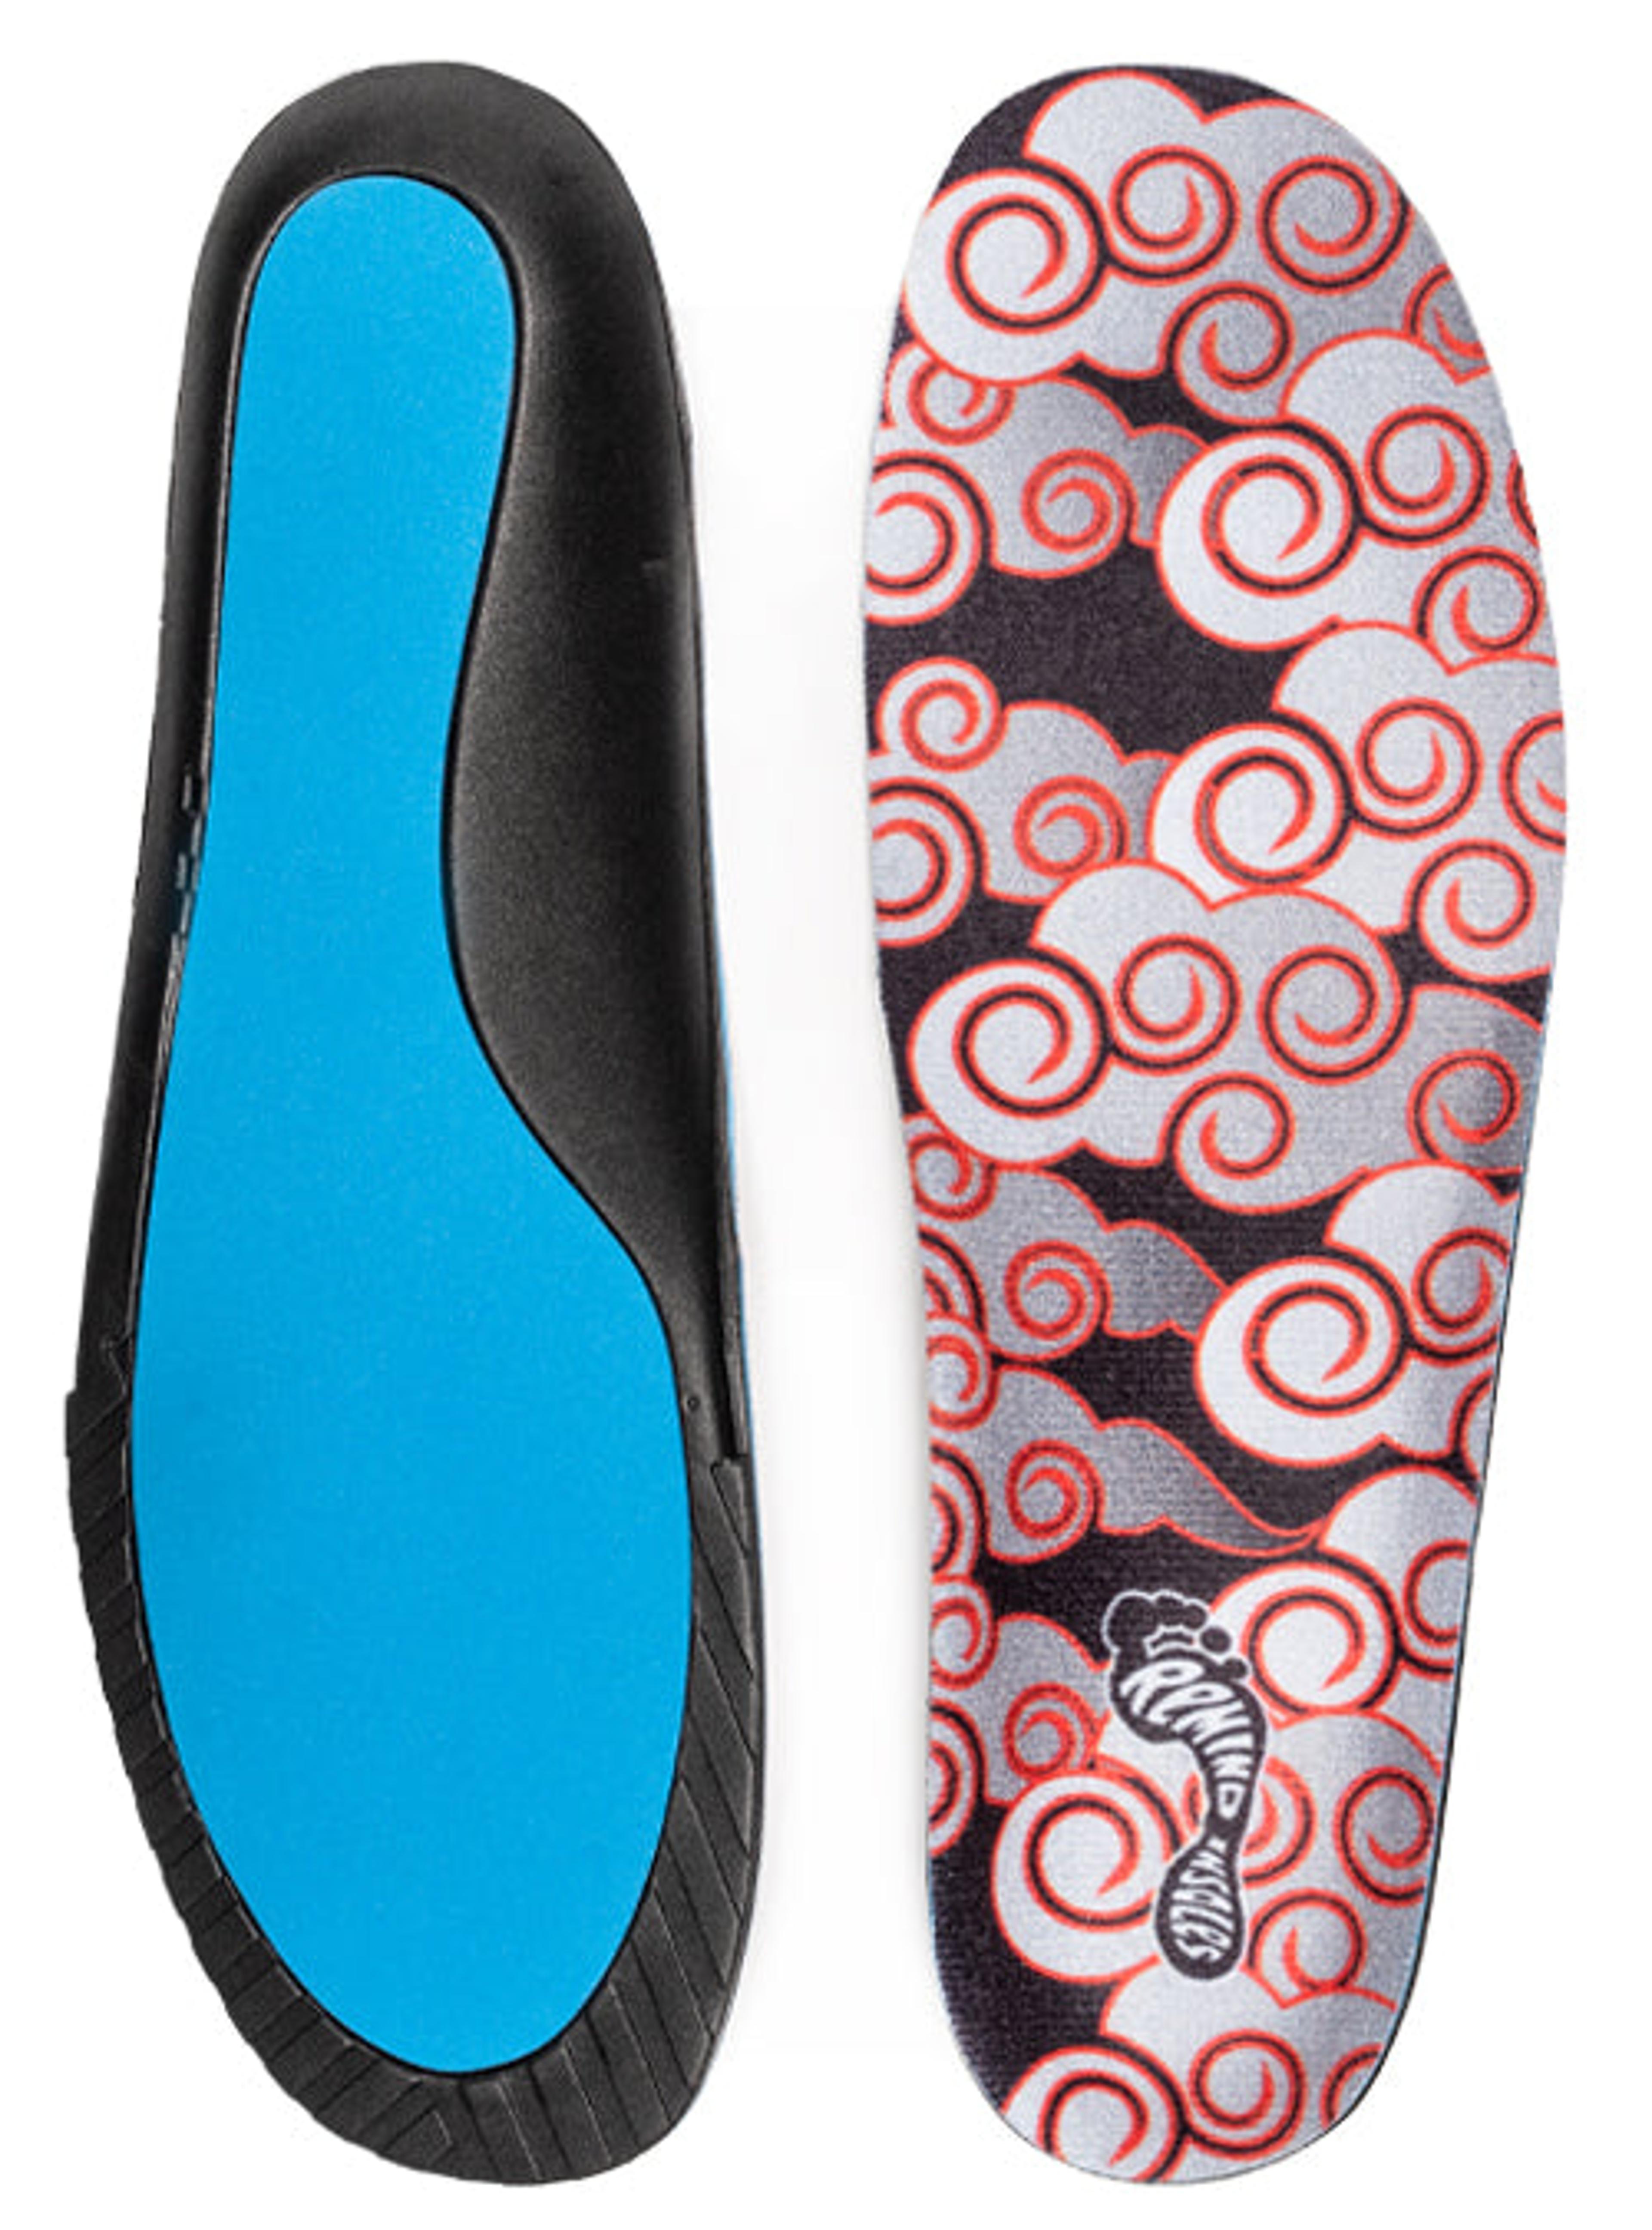 Alternate View 2 of MEDIC CLASSIC 5MM Mid-High Arch | Clouds Insoles